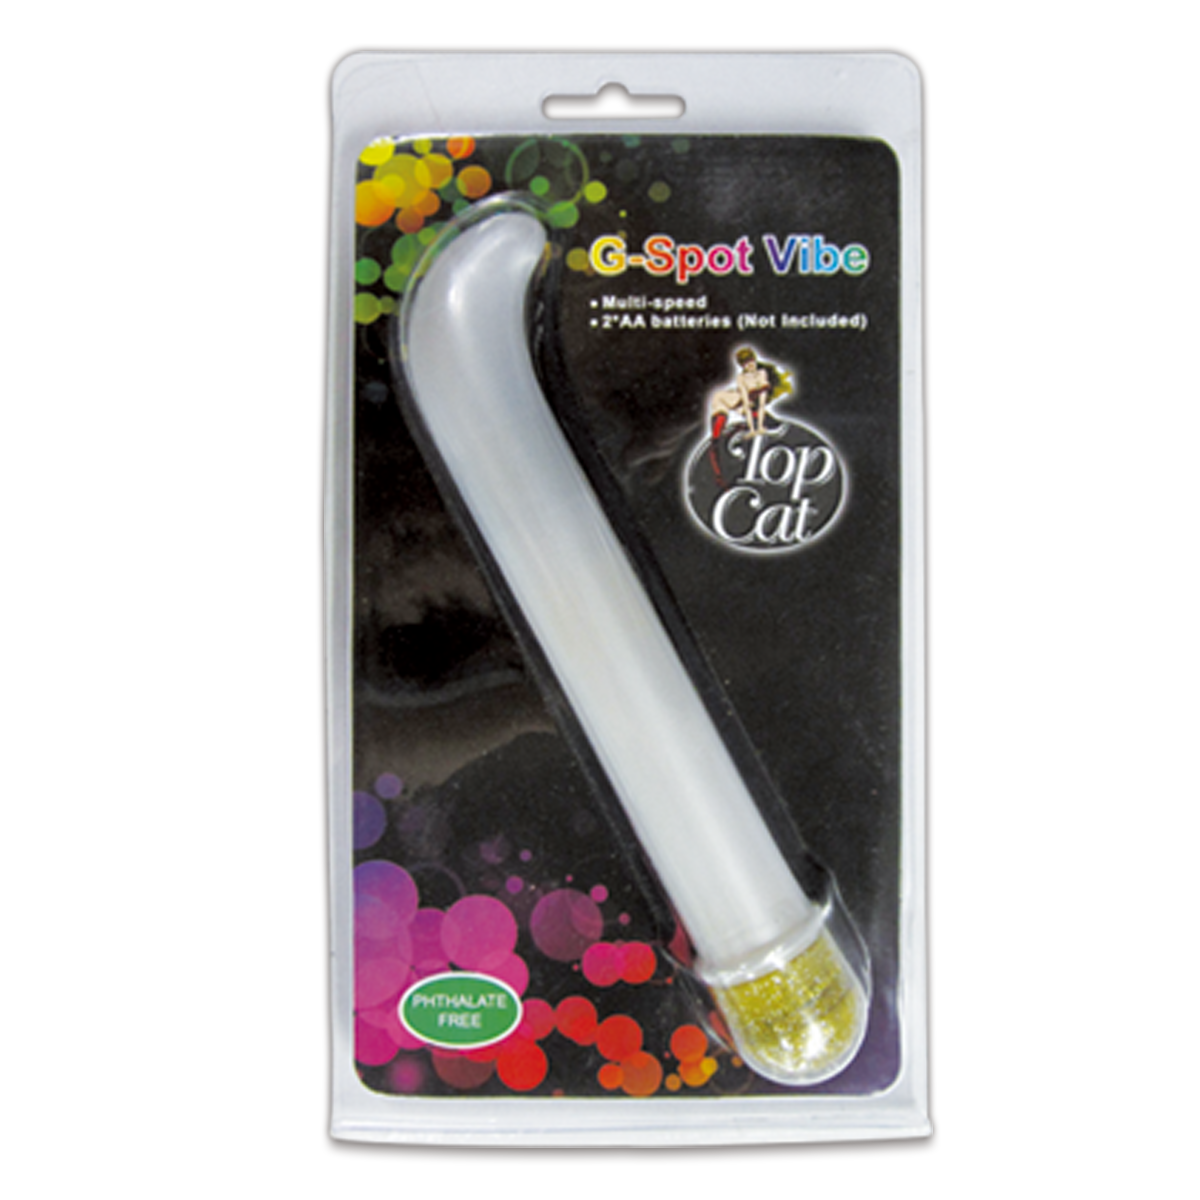 G Spot Vibe High Quality Adult Fun For You And Your Partner